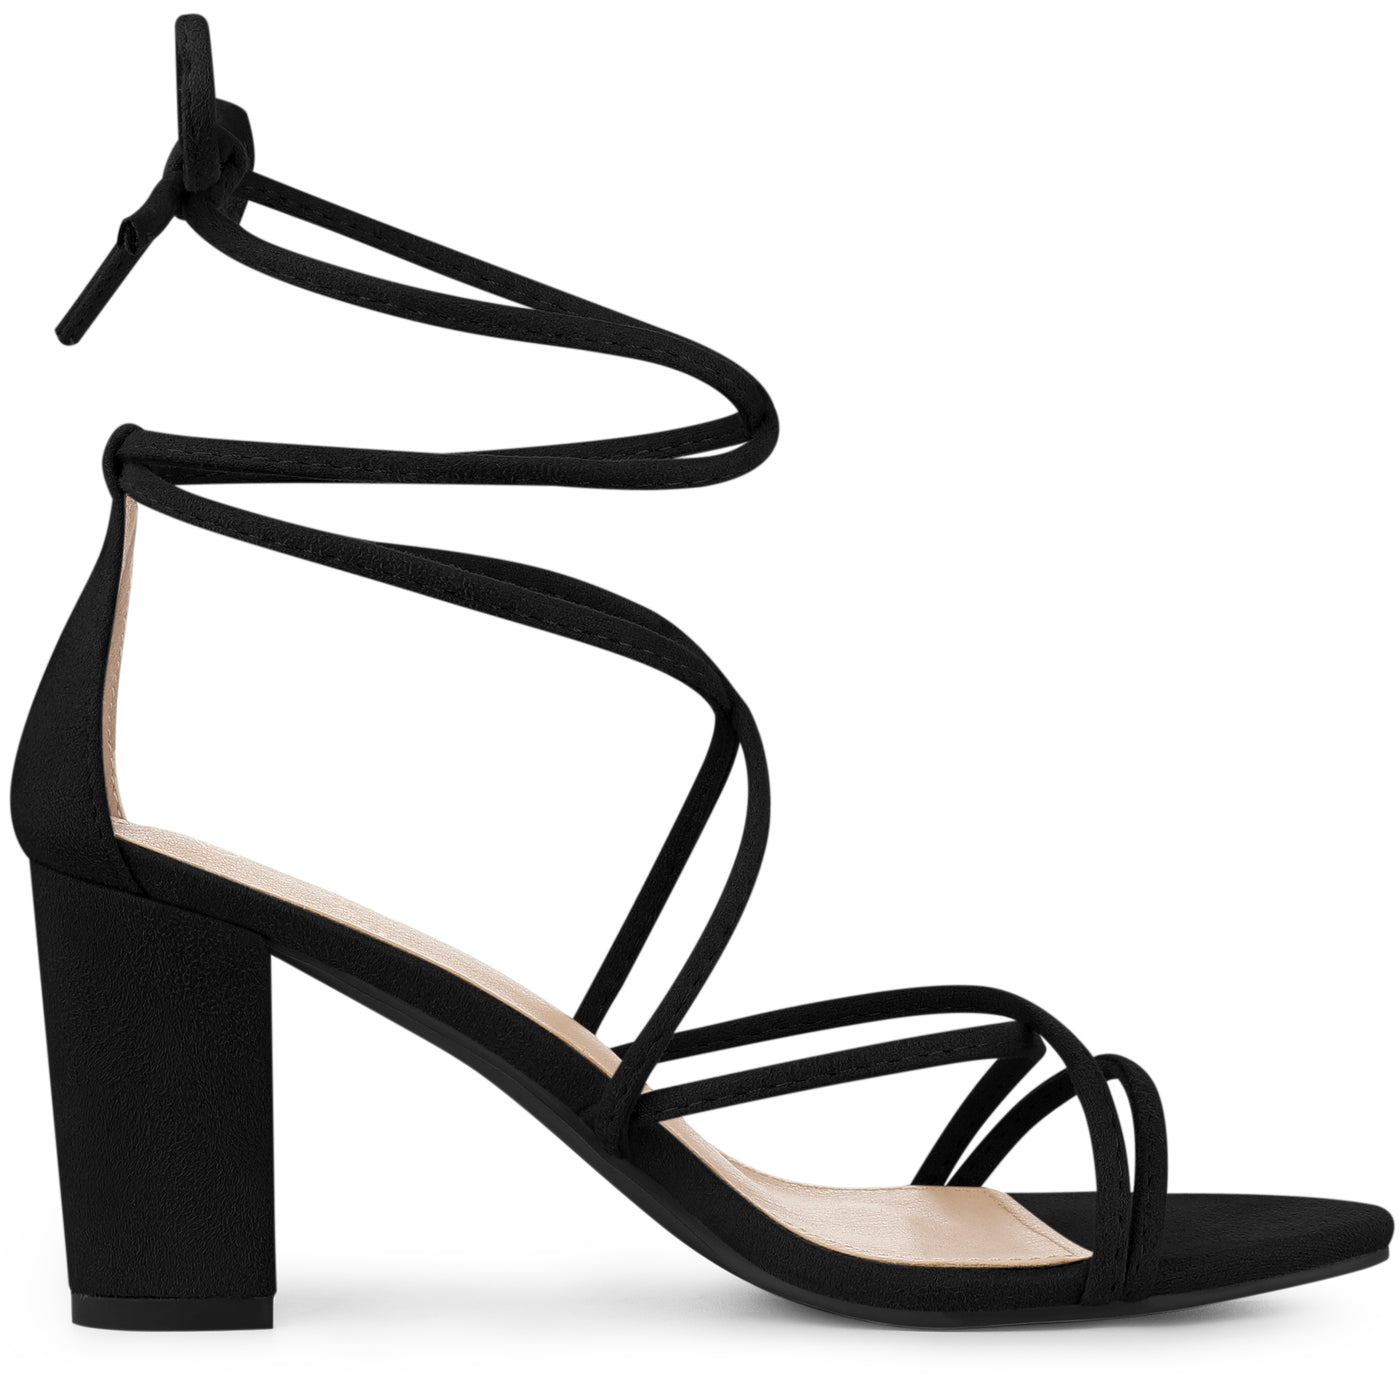 Cethrio Women's Strappy Block Heel Sandals- on Clearance Chunky Heel Mid  Heel Bow Fish Mouth Wide Width Black Dressy Sandals/ Slides Size 6 -  Walmart.com